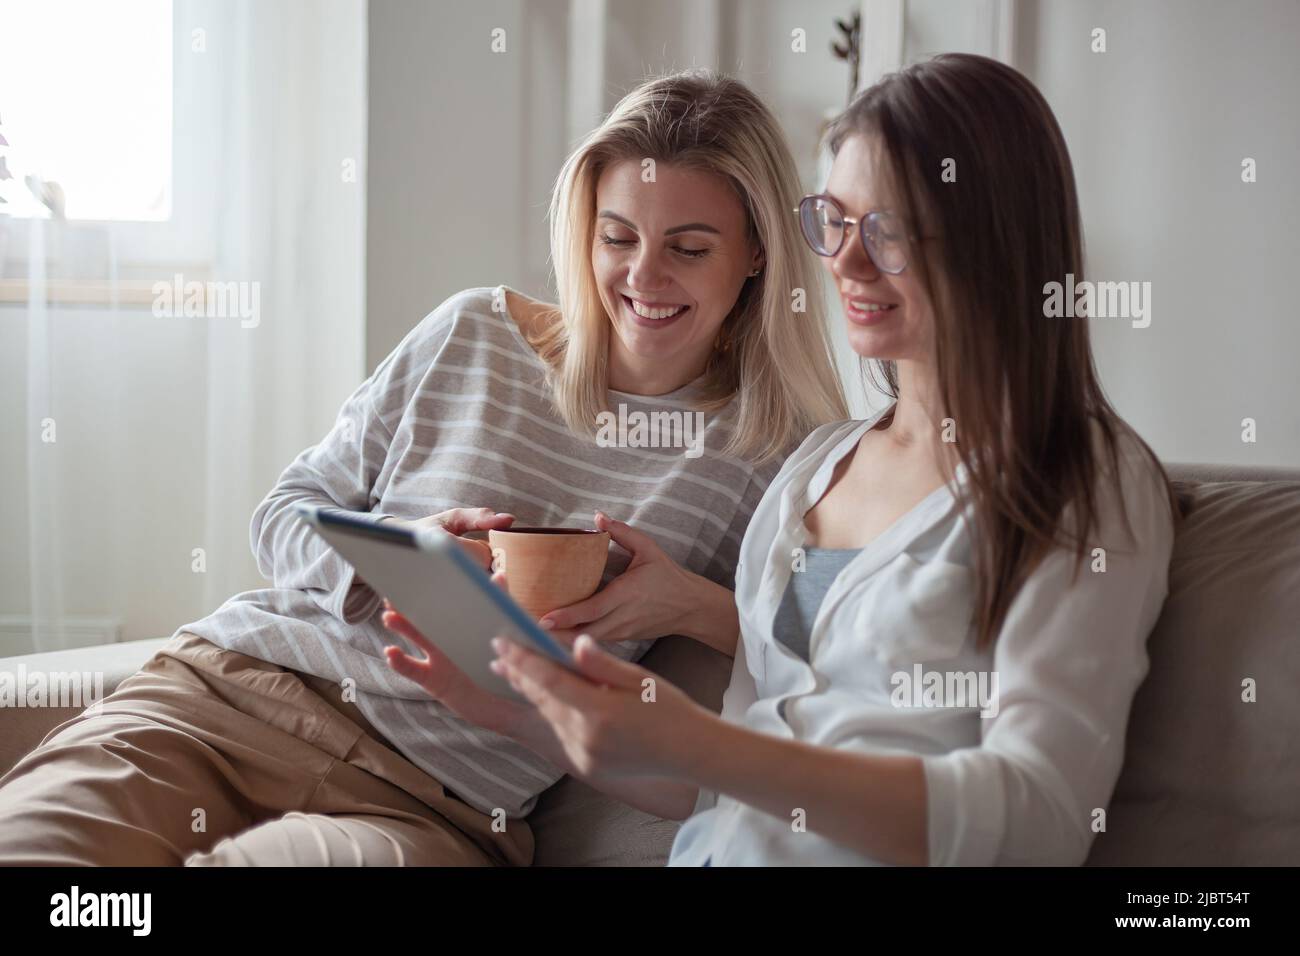 Two young women friends using tablet together, sitting on the couch smiling and fun Stock Photo